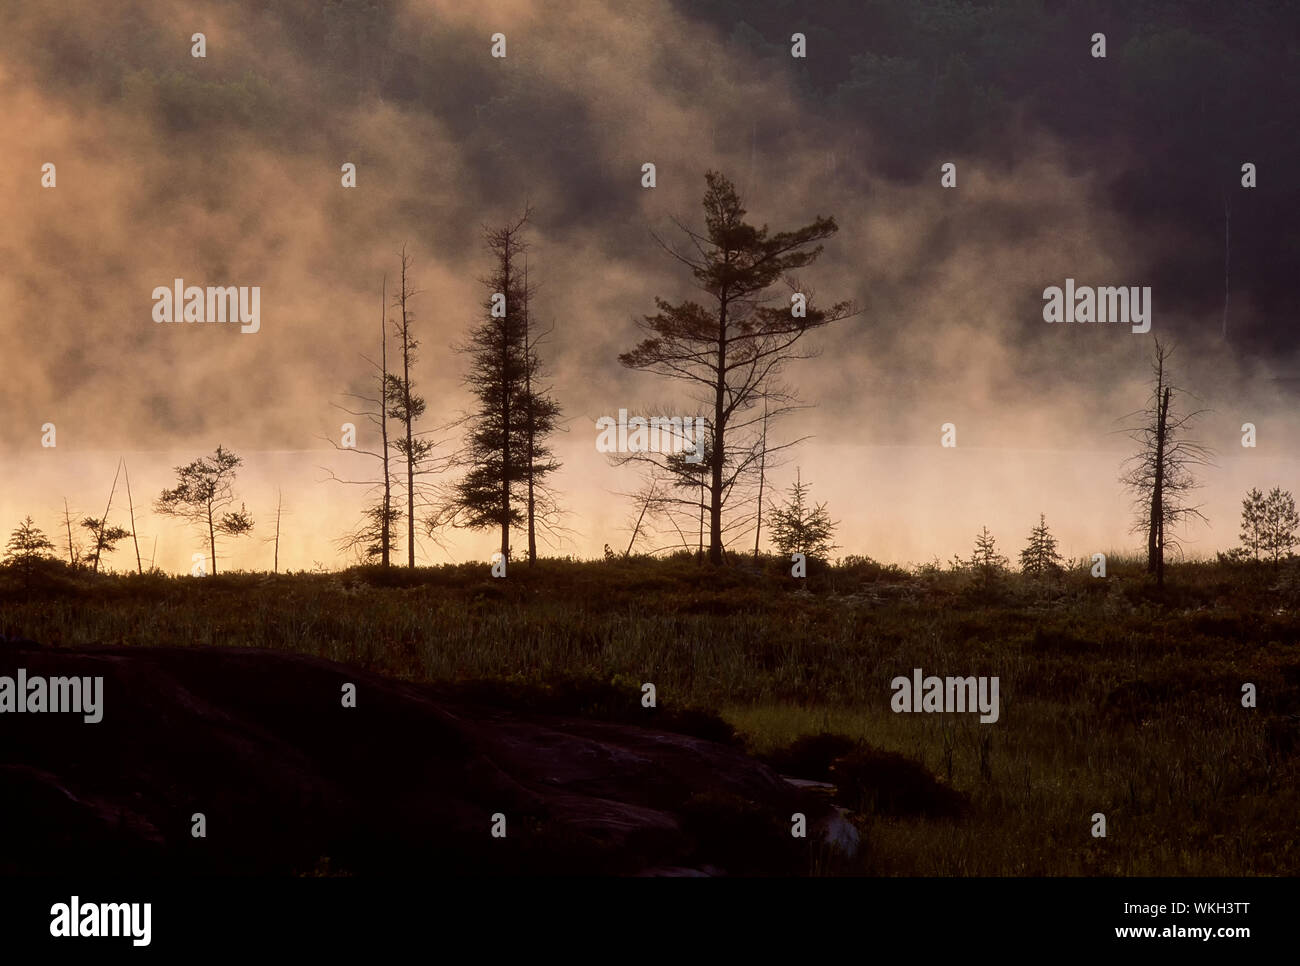 Mist rising on pond in early morning, Sudbury, Ontario, Canada Stock Photo